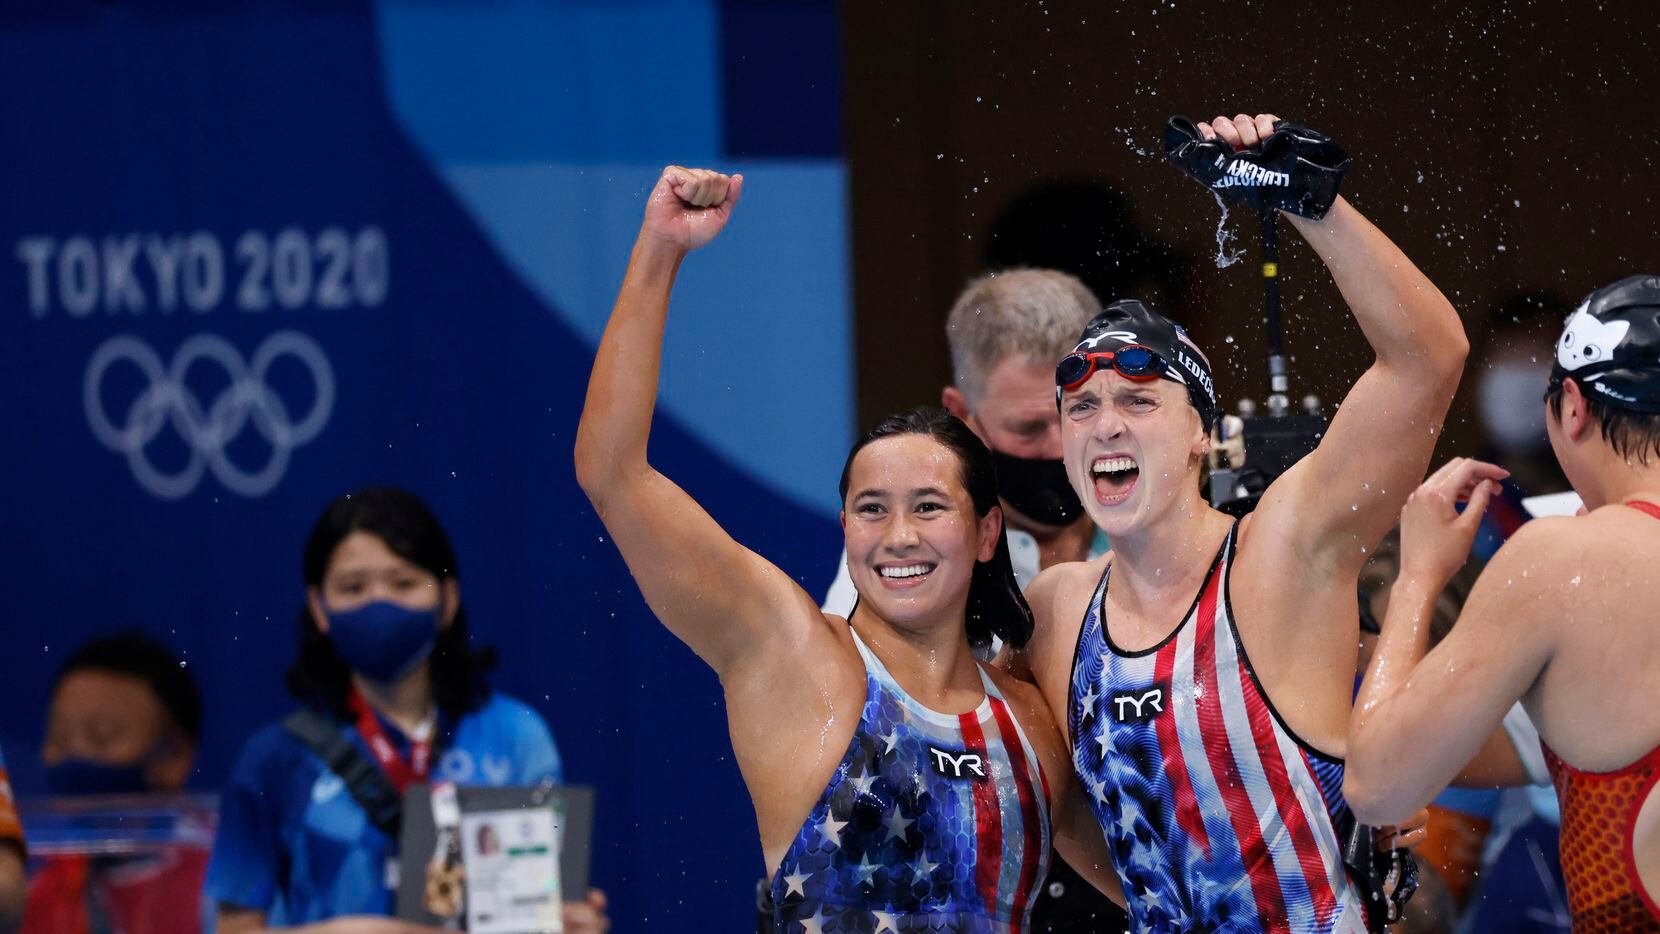 USA’s Katie Ledecky and Erica Sullivan celebrate after winning a gold medal in the women’s 1500 meter freestyle final at the postponed 2020 Tokyo Olympics at the Tokyo Aquatics Centre on Wednesday, July 28, 2021, in Tokyo, Japan.